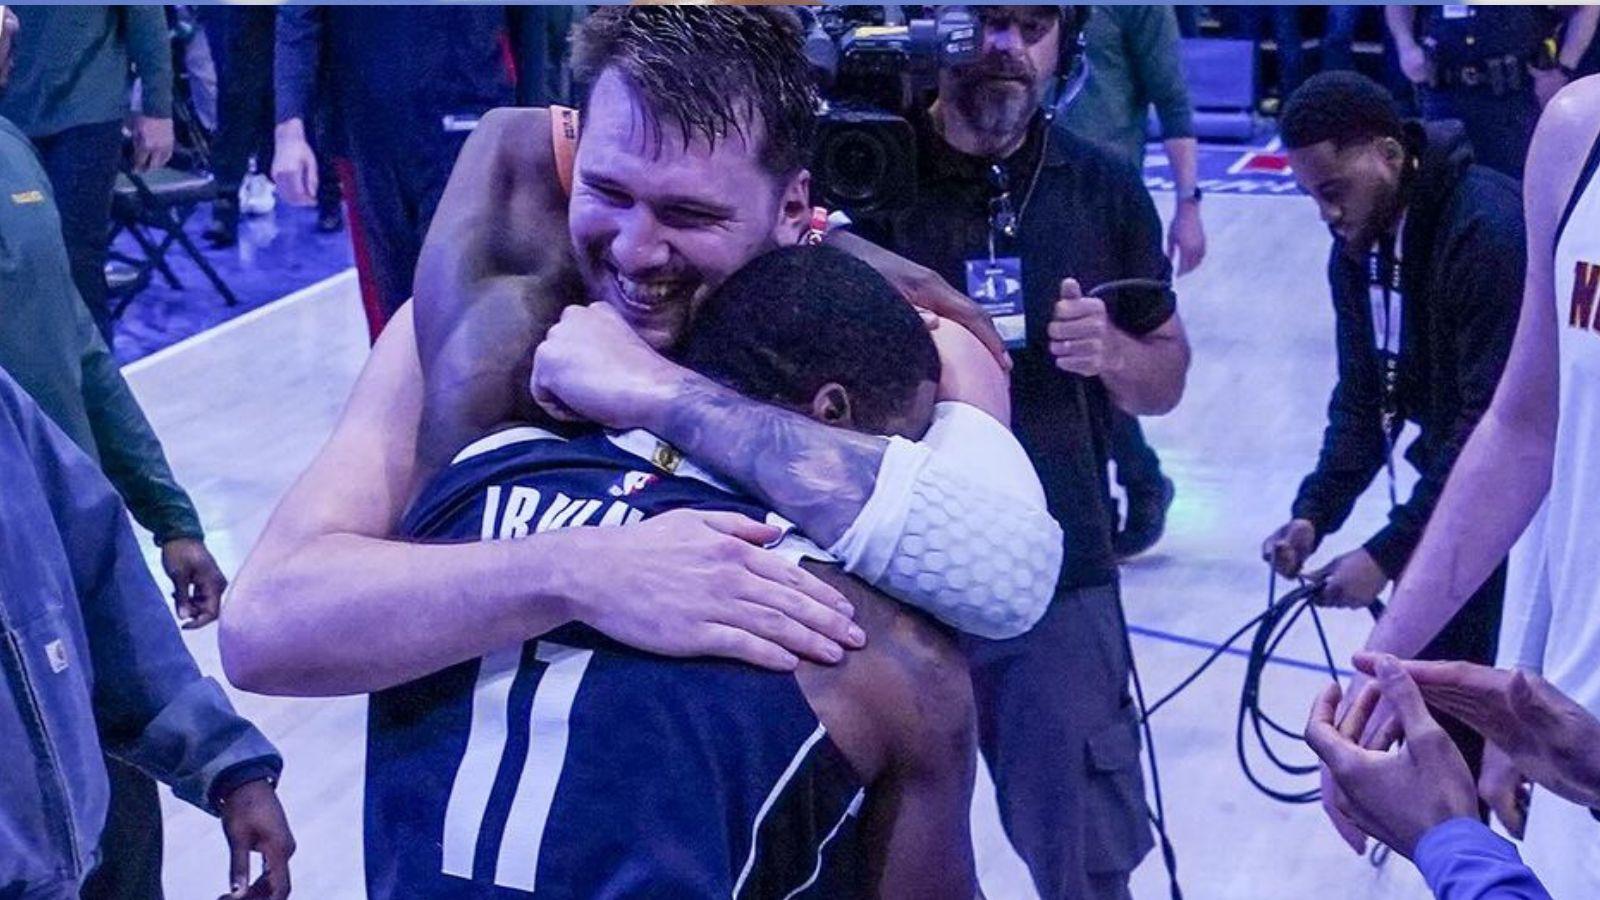 Luka Doncic and Kyrie Irving embrace as members of the Dallas Mavericks.